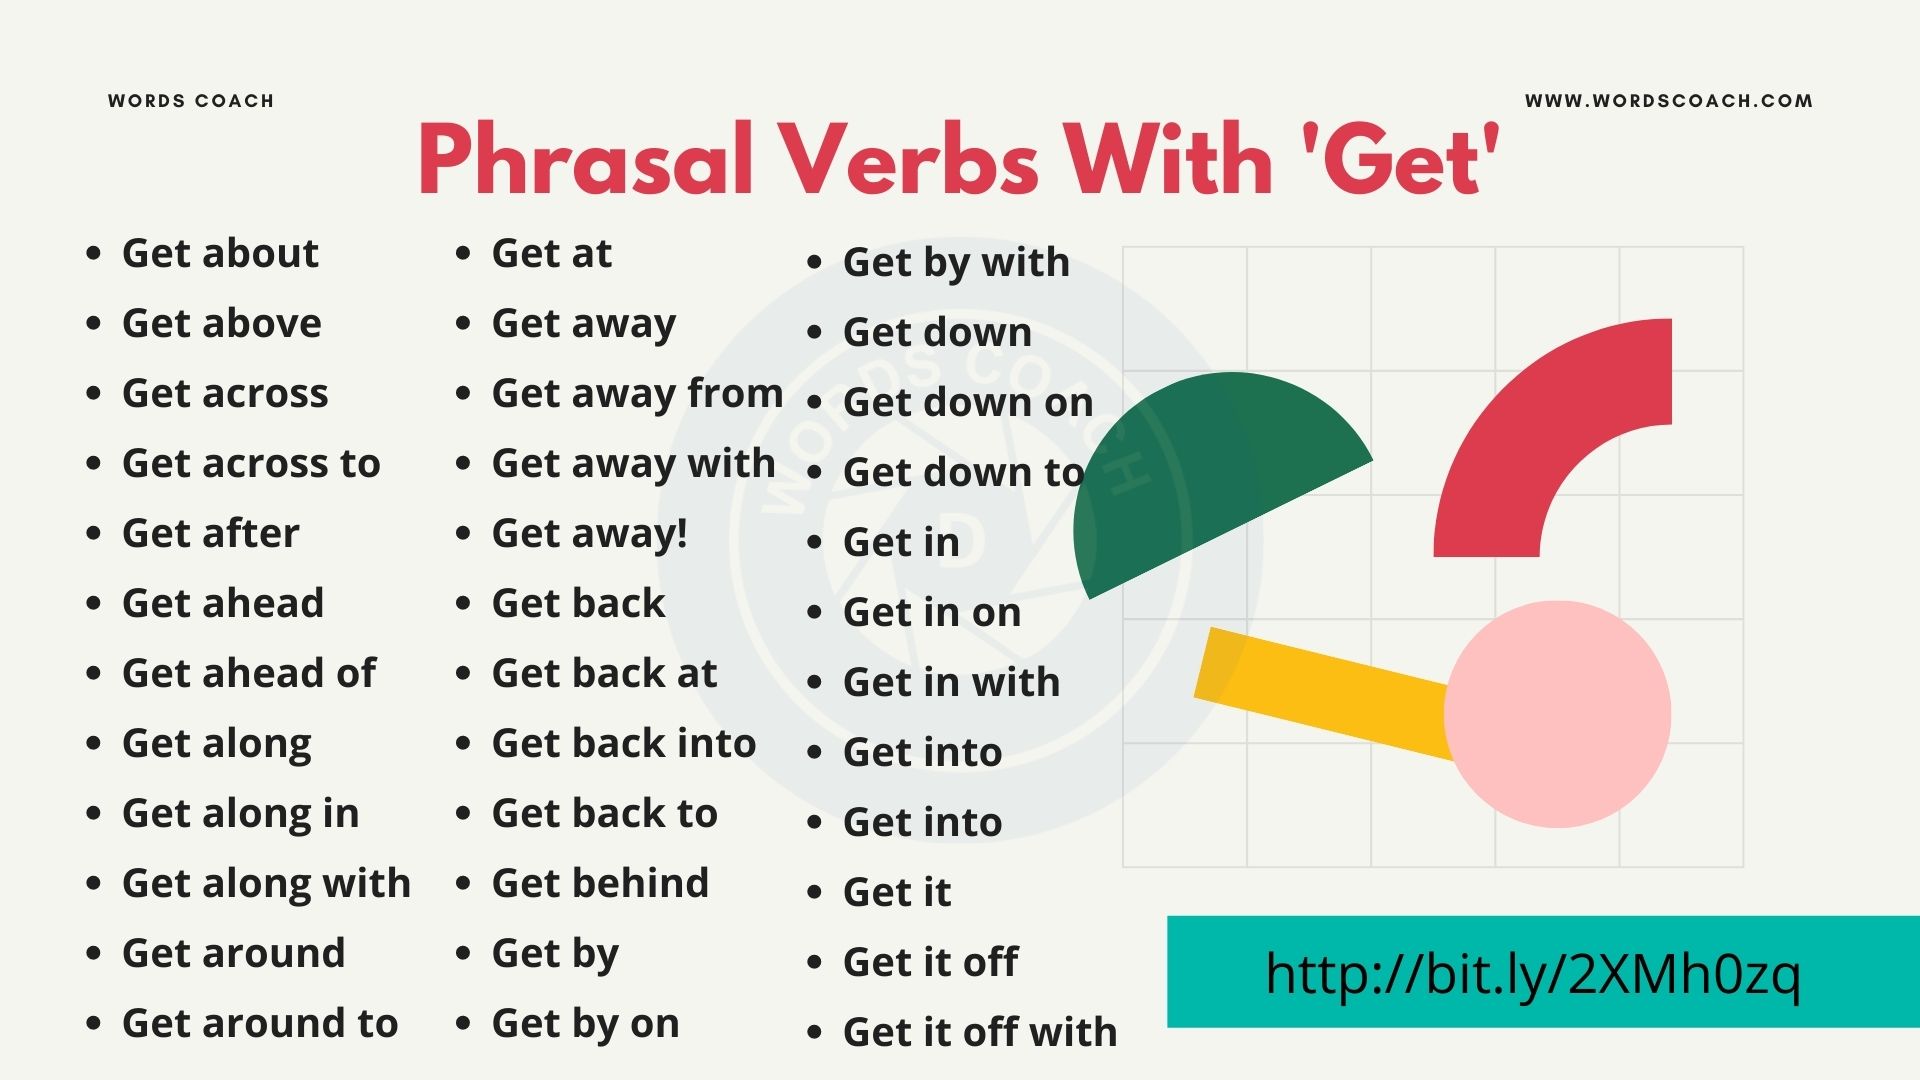 Phrasal Verbs With 'Get'